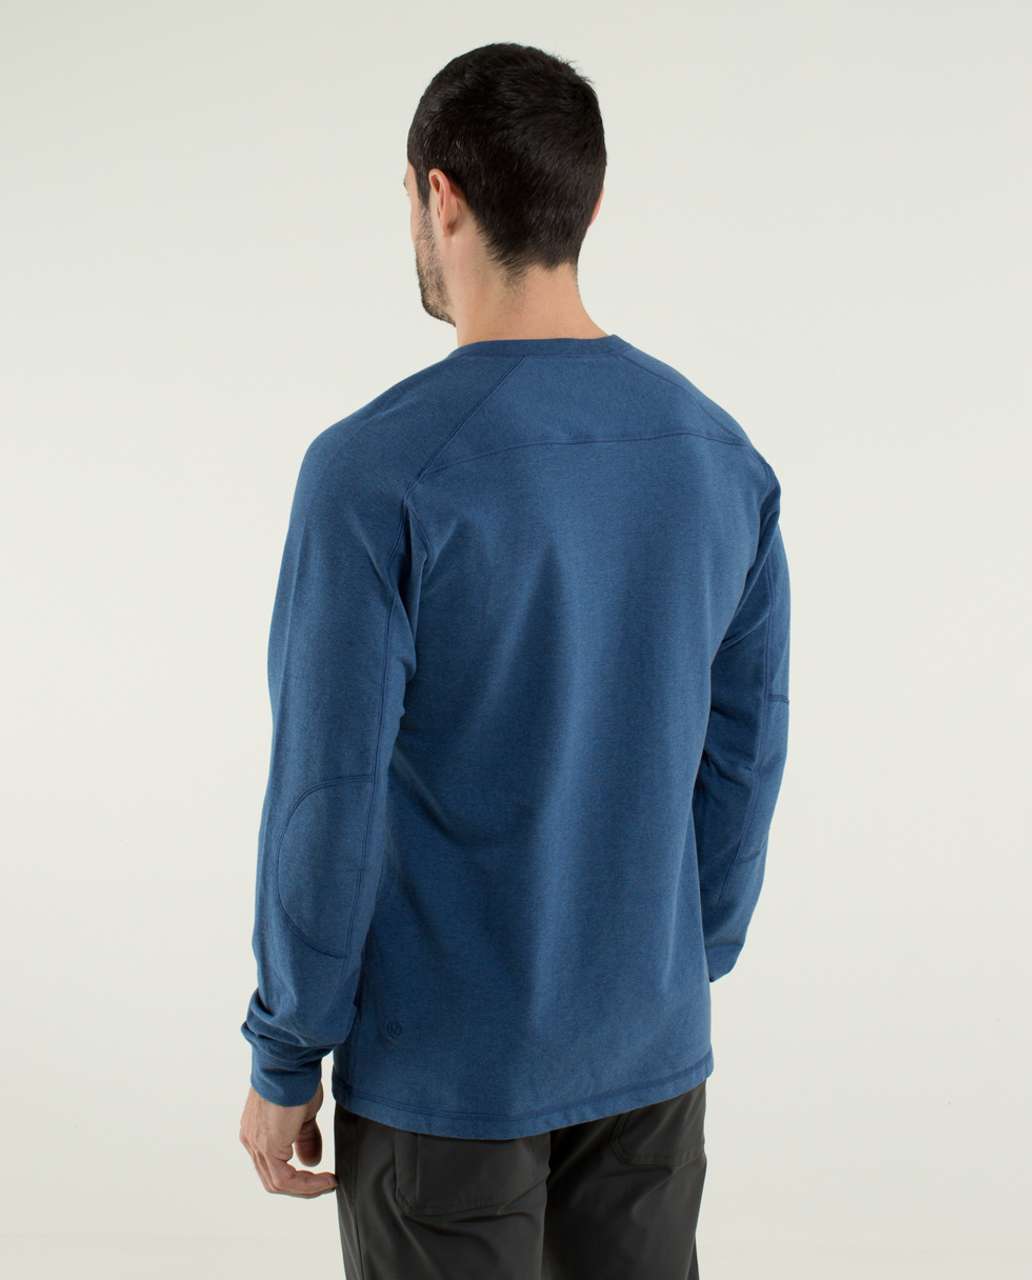 Lululemon All Town Henley - Heathered Rugged Blue / Inkwell